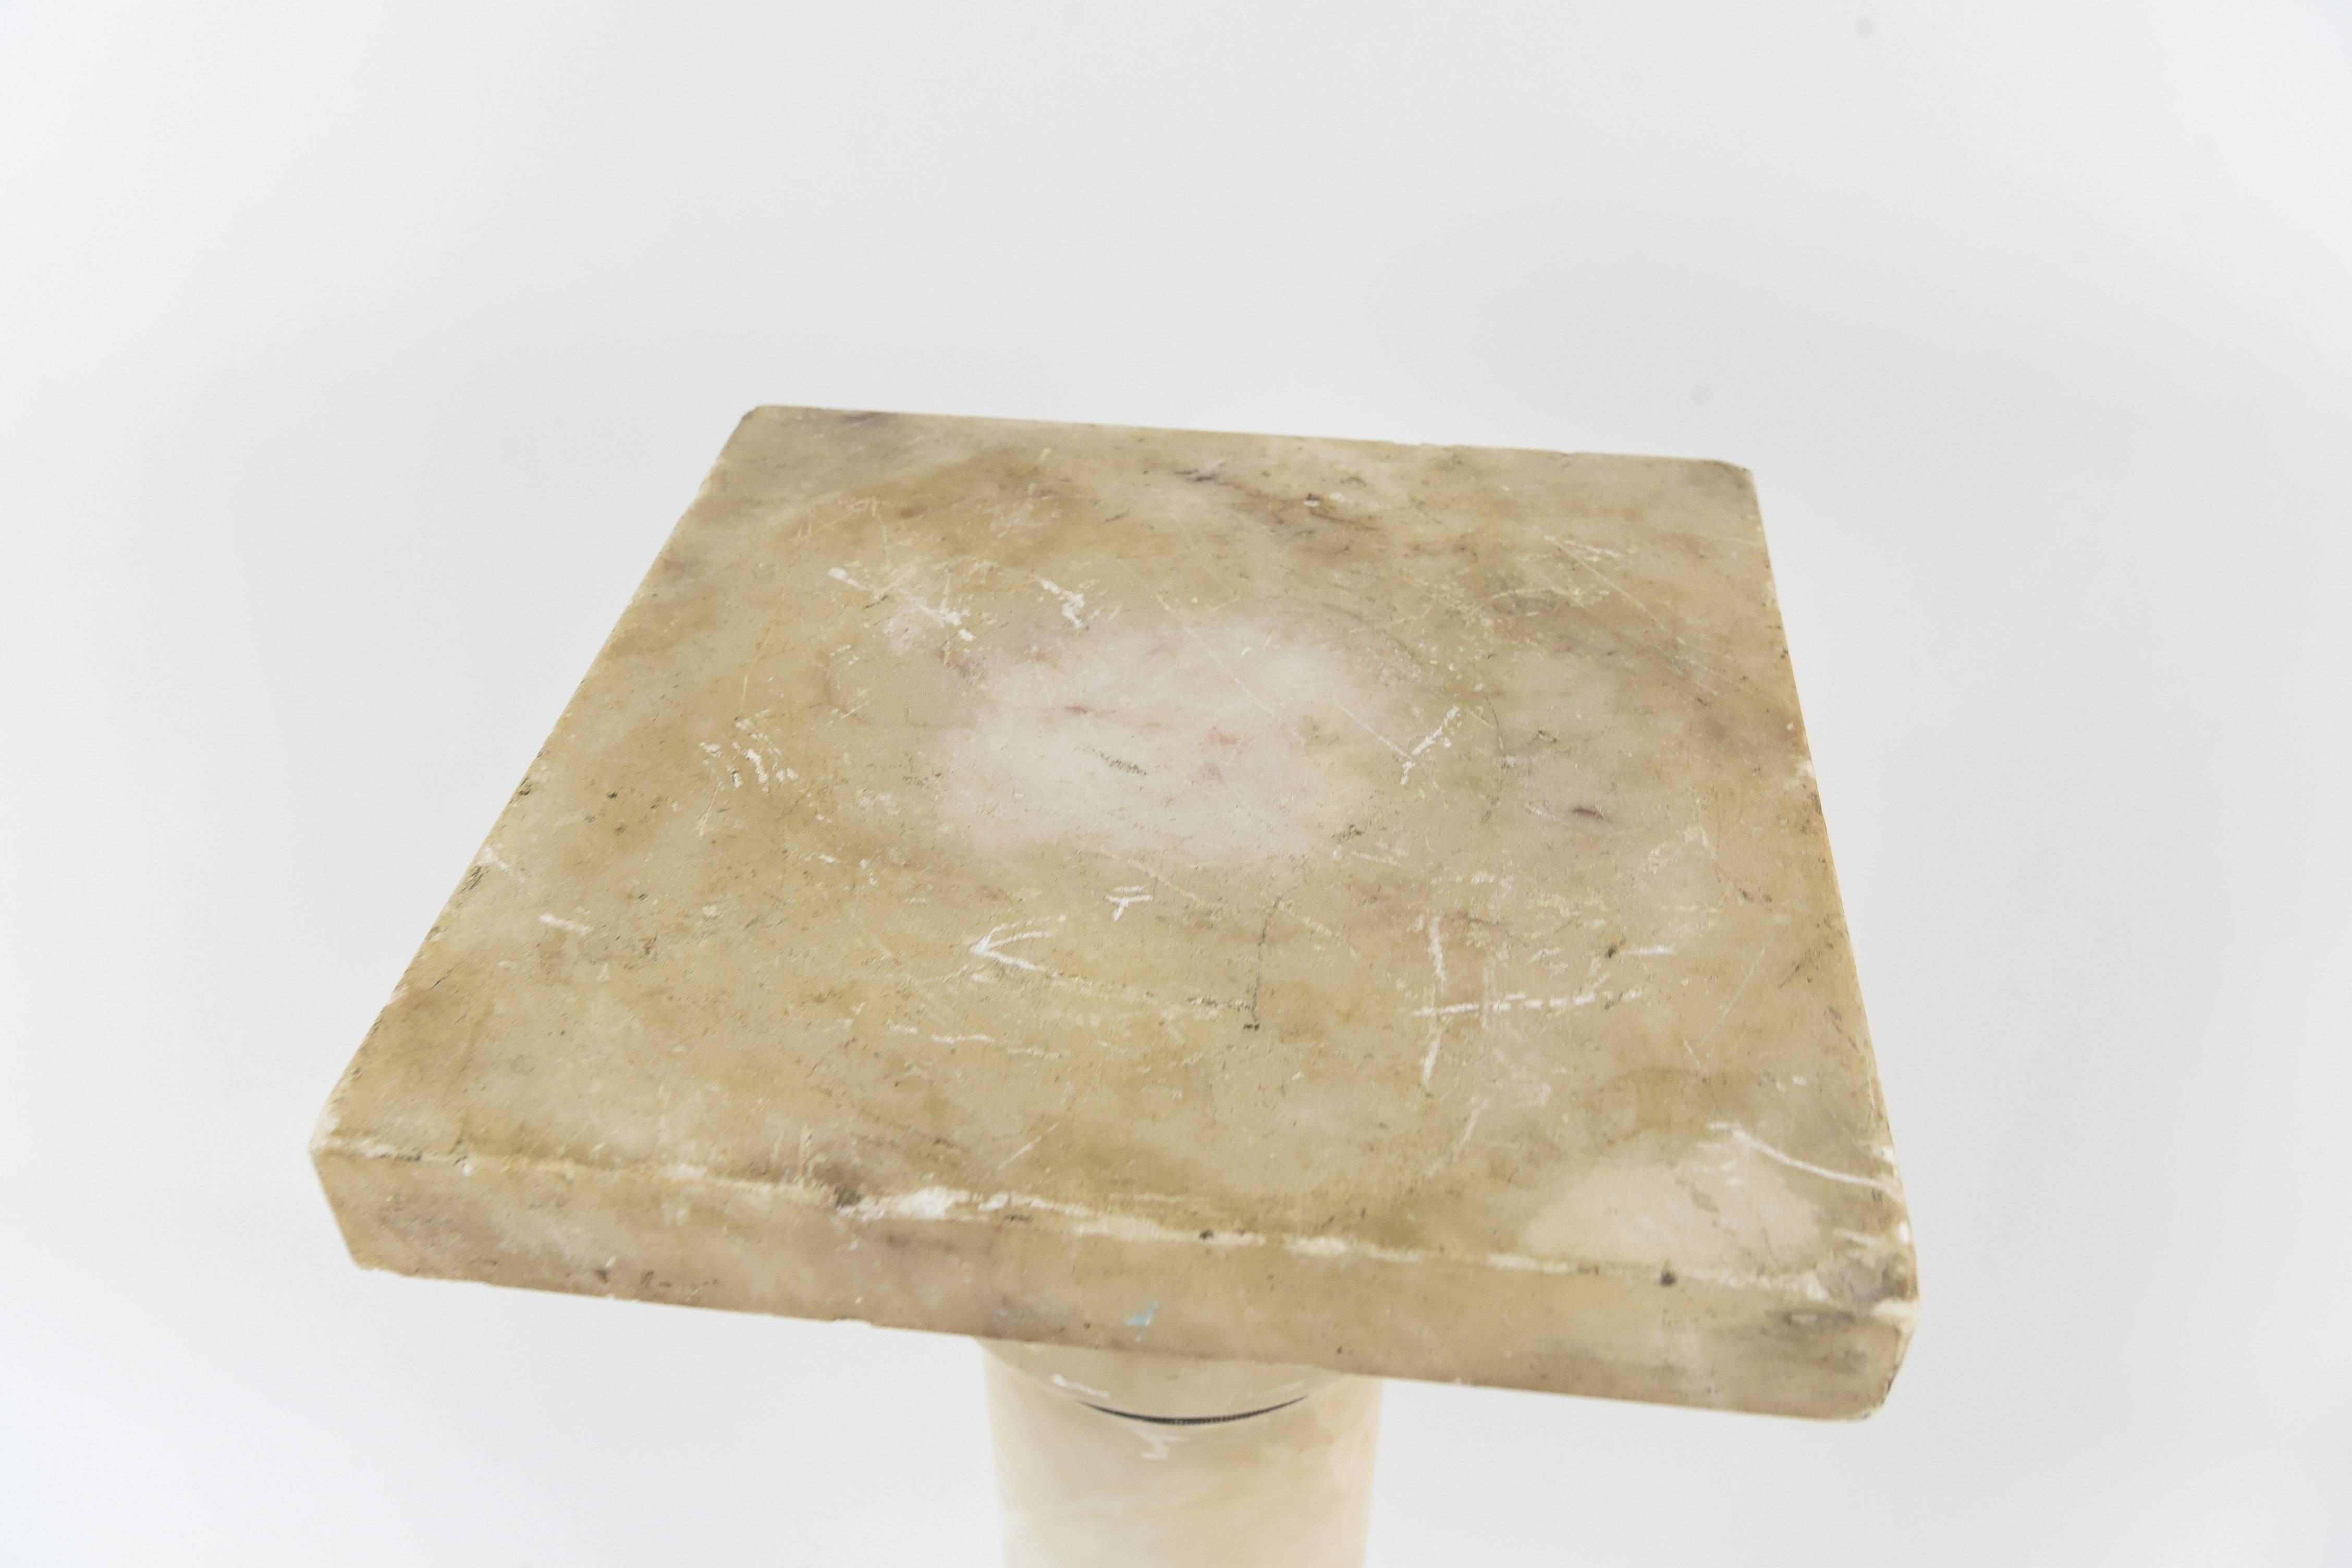 This stunning marble pedestal has a great look on its own, but could also be a beautiful display for another piece. With a neutral marble color, this pedestal would work in any context.